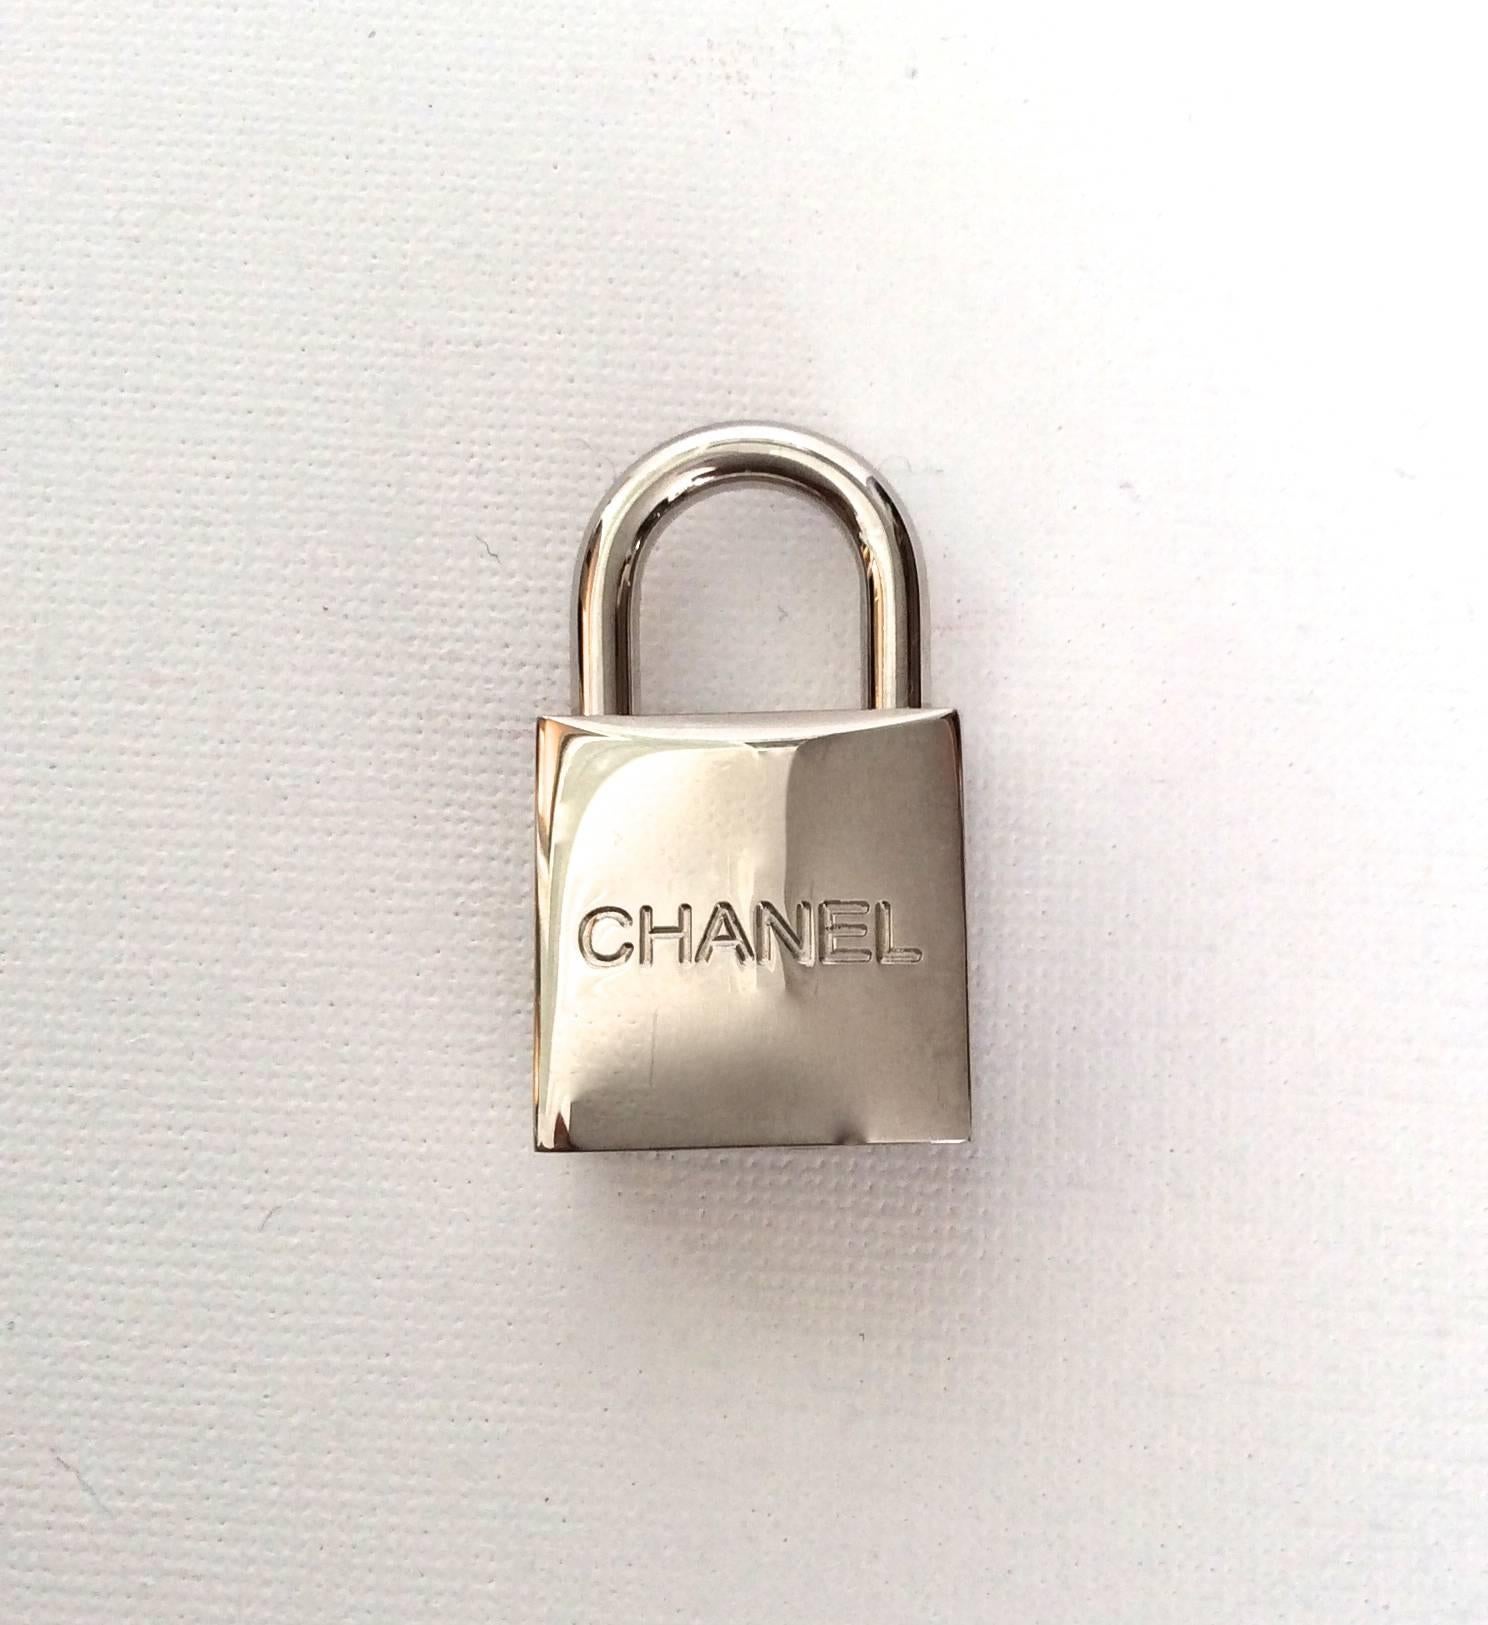 Chanel luggage lock for handbag and luggage. The lock is silver palladium metal and locks and opens with a key. The lock is 1.4 inches tall and .75 inches wide. There is an embossed 'CC' logo on the back of the lock and the front of the lock there